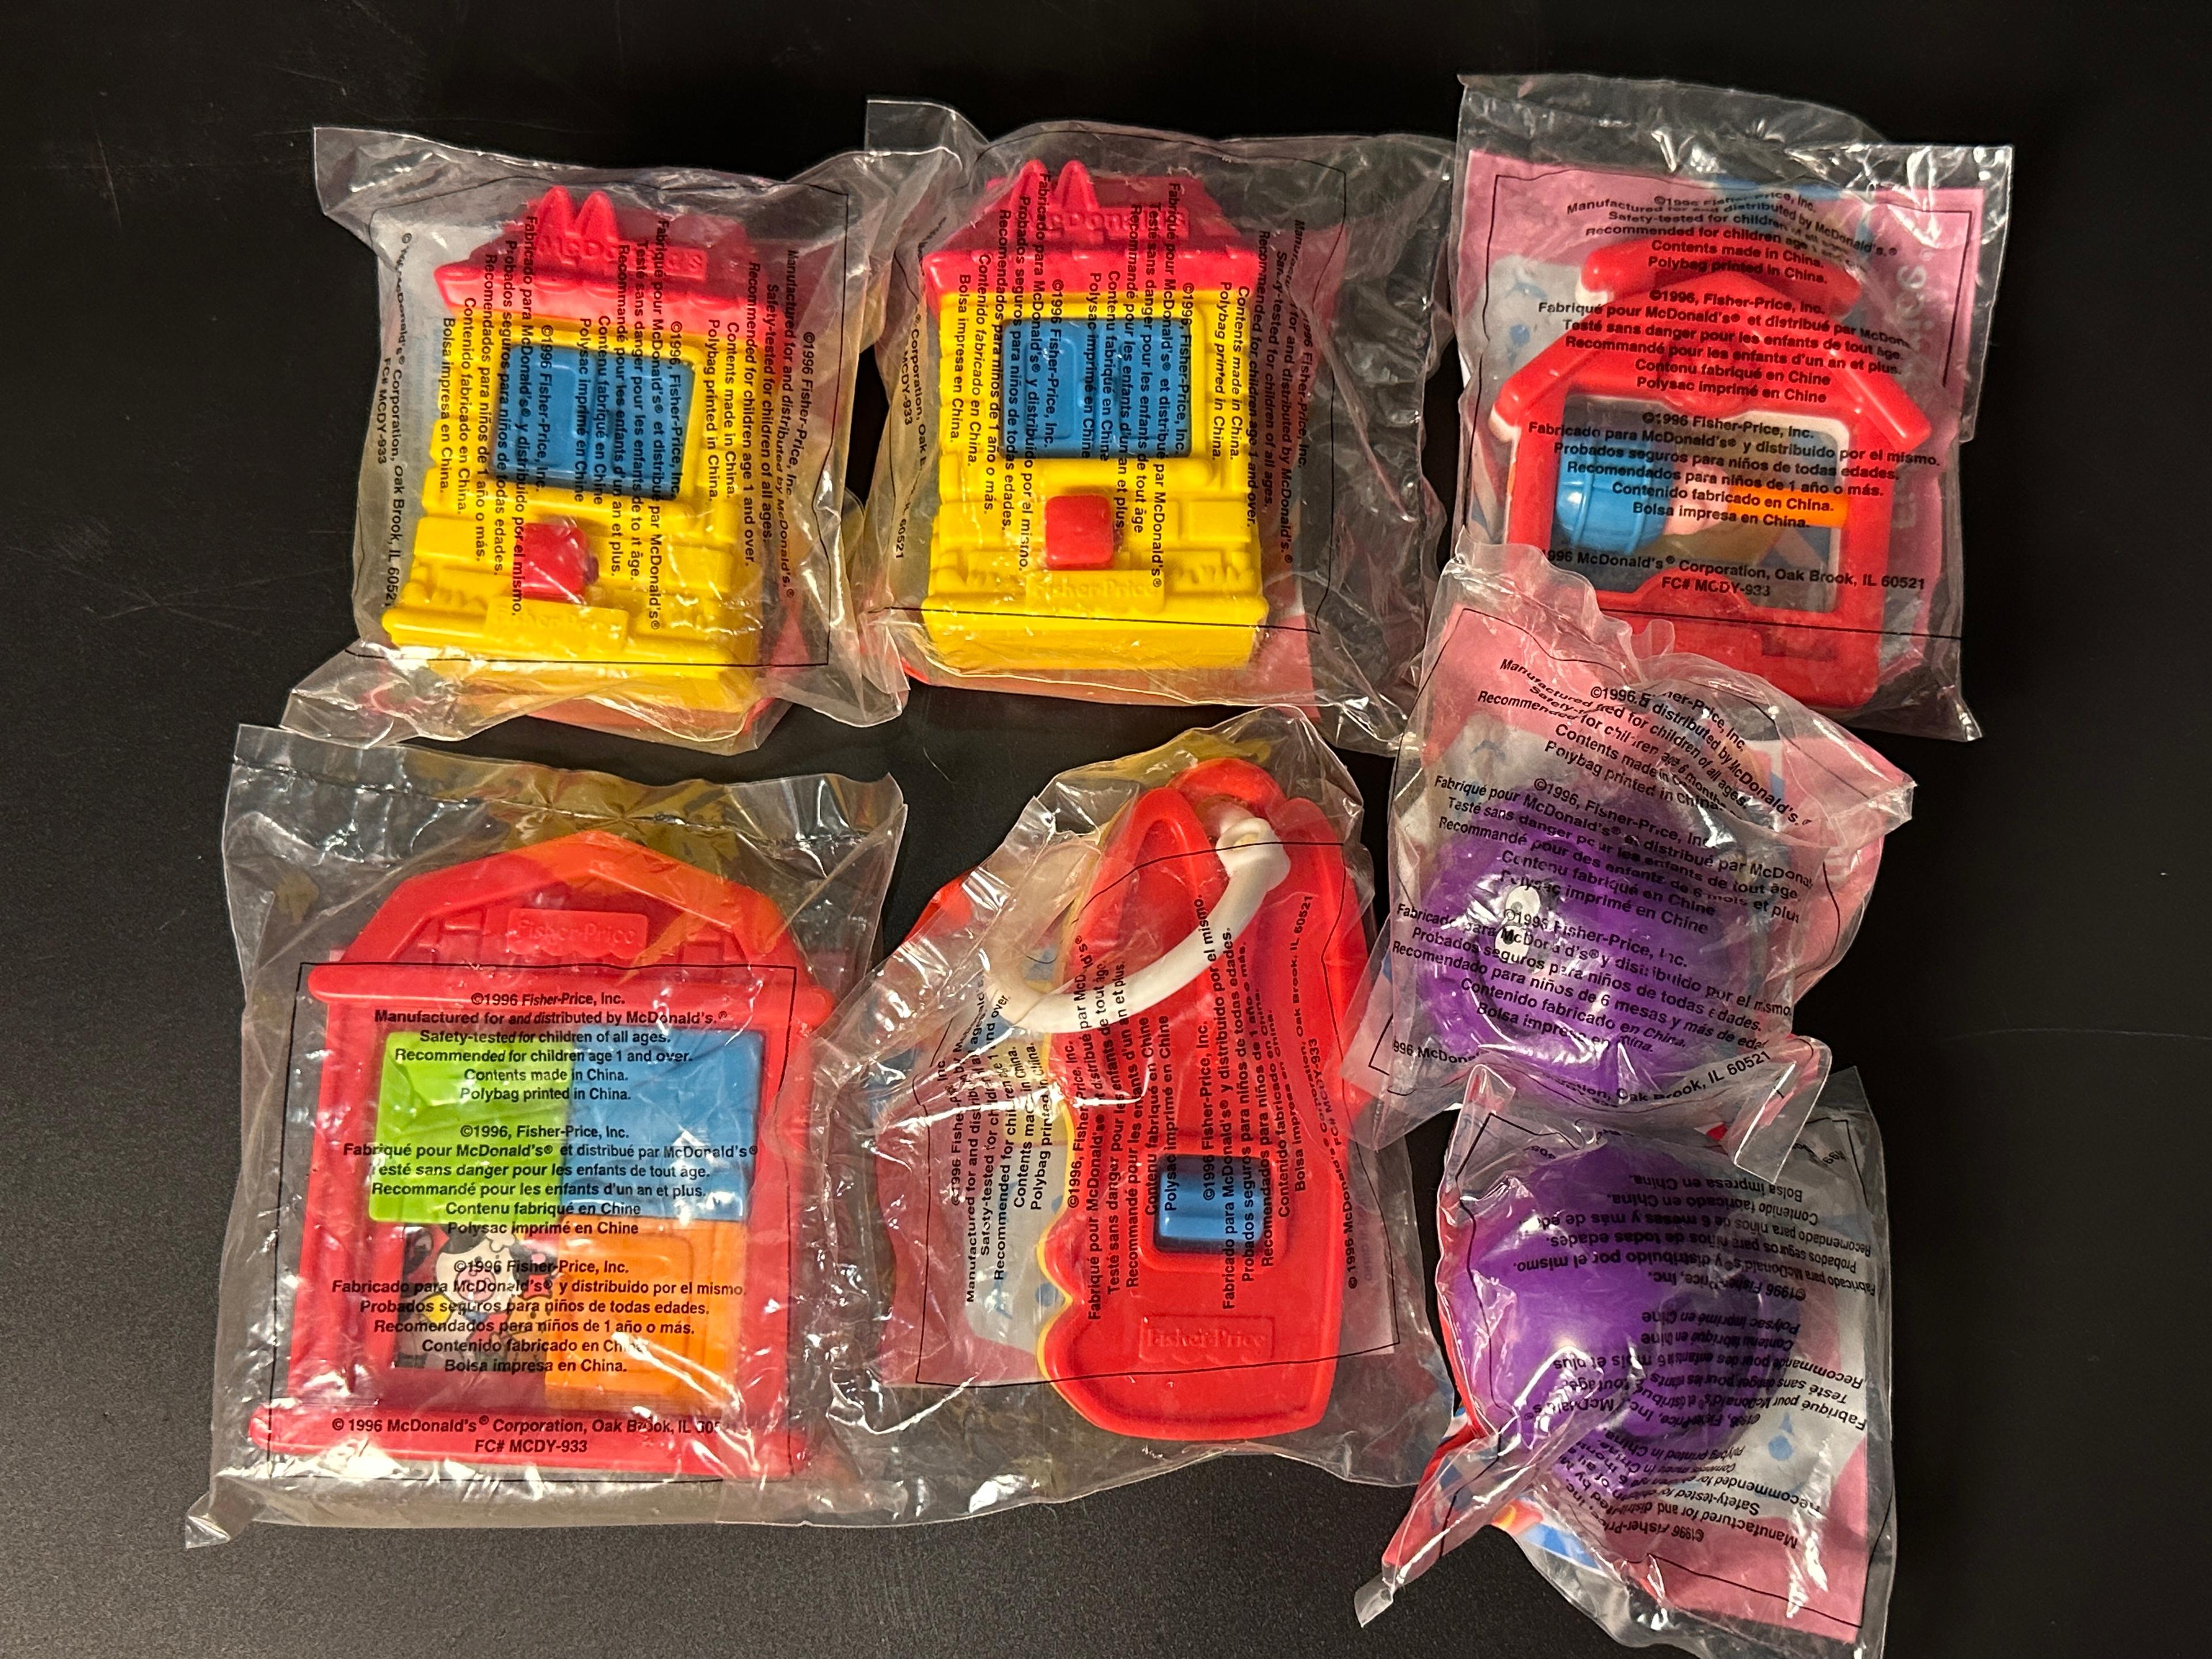 Collection of McDonalds Happy Meal Toys